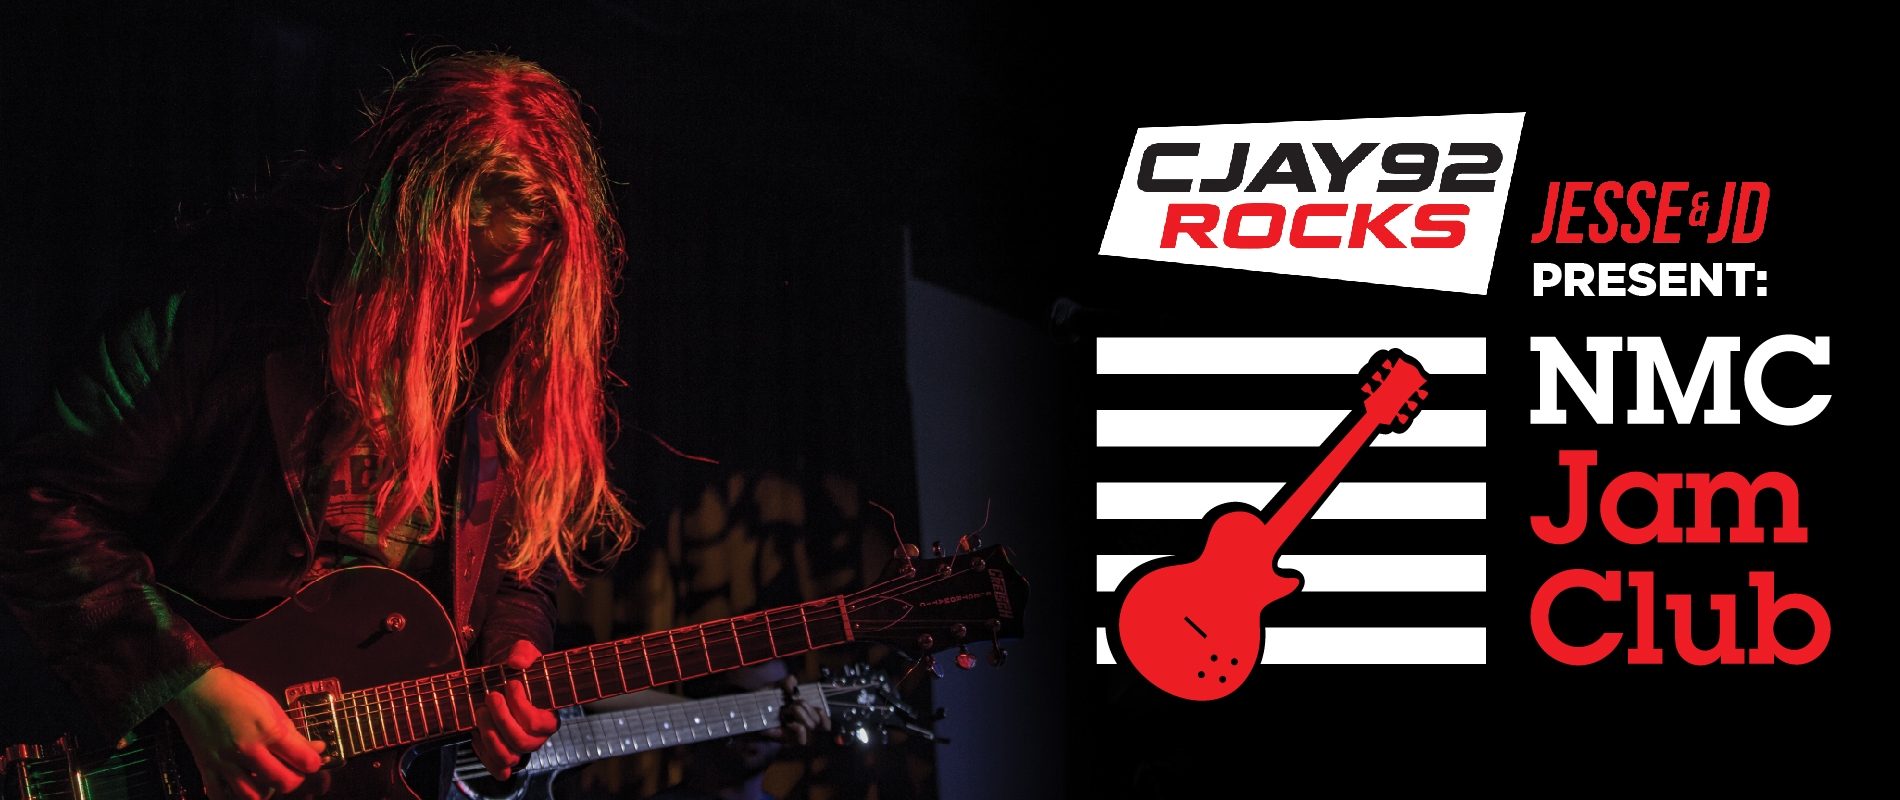 National Music Centre Partners with CJAY 92 to Support Next Generation of Rock Stars